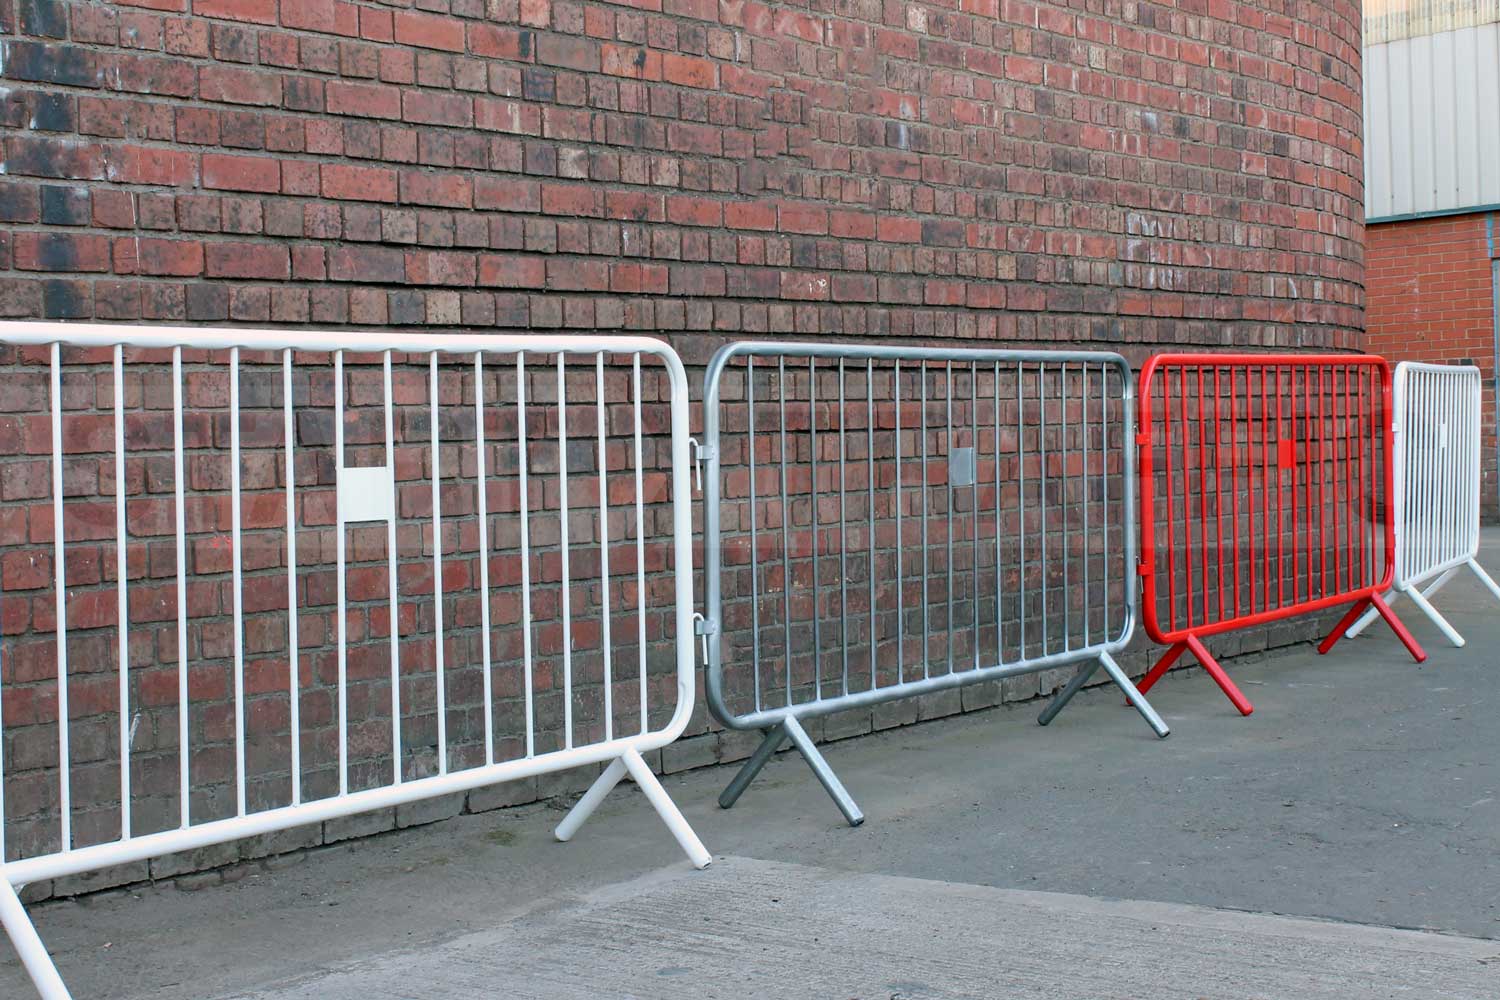 Crowd Control Barriers Infront Of A Wall